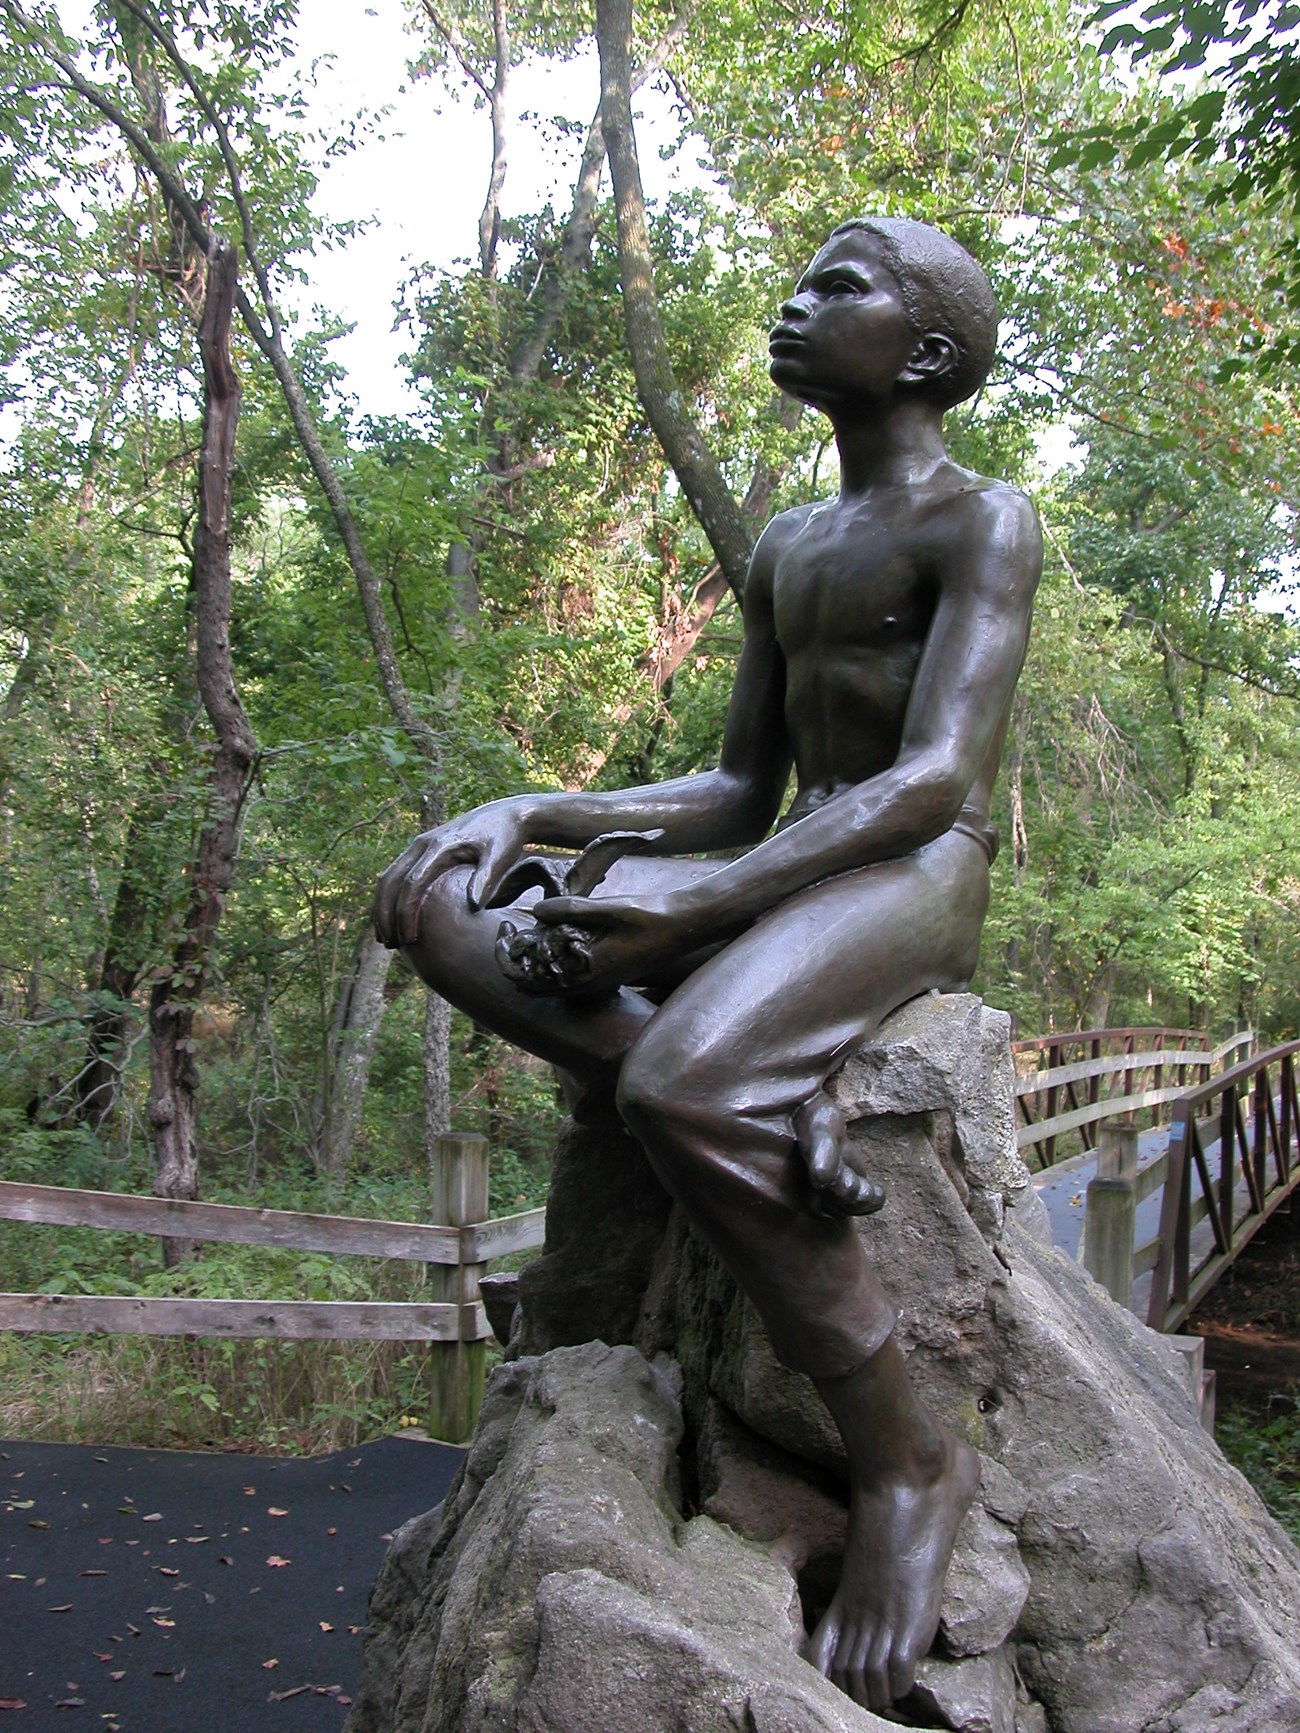 Bronze statue of George Washington Carver as a young child. He is holding a plant and sitting on a large boulder.